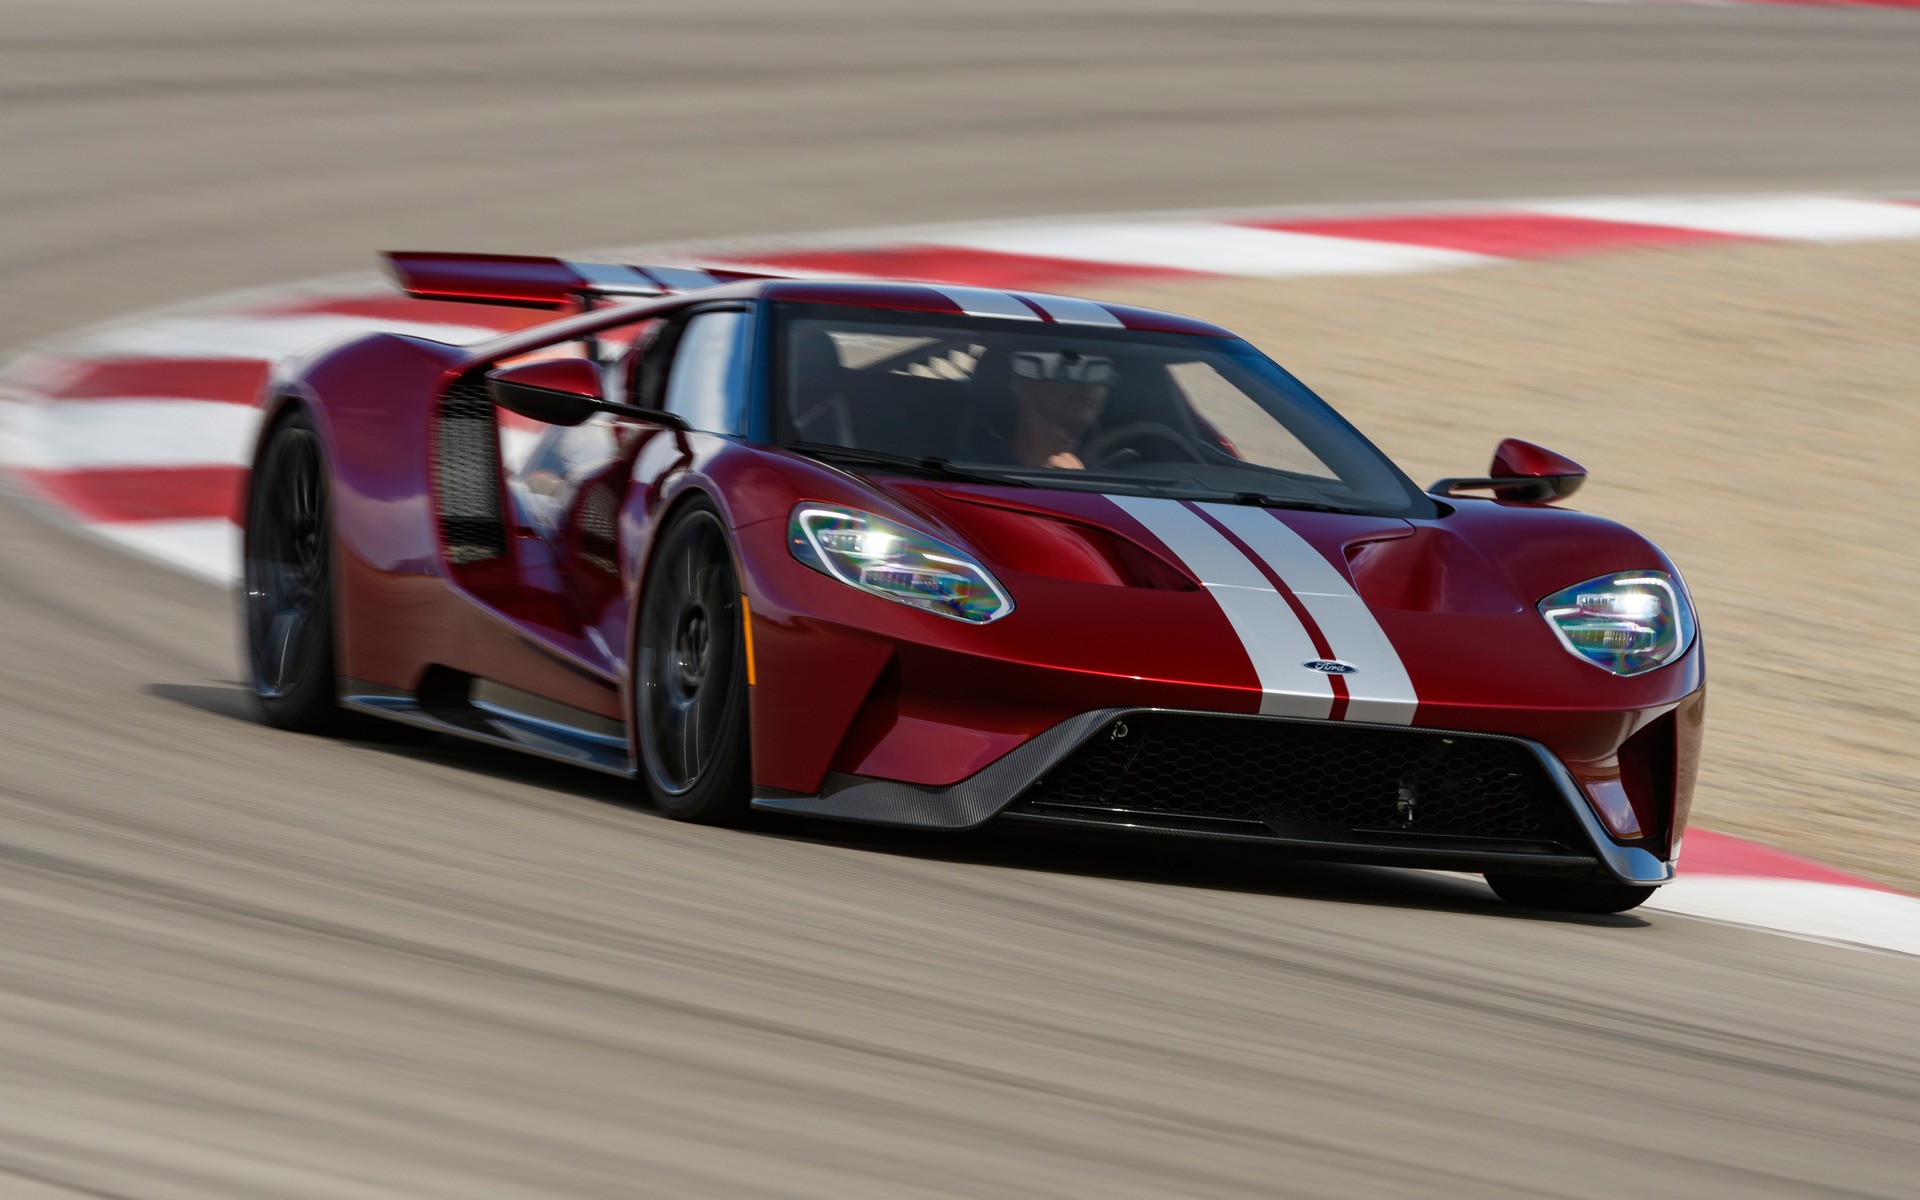 tetraeder tjære Maladroit 2019 Ford GT Specifications - The Car Guide